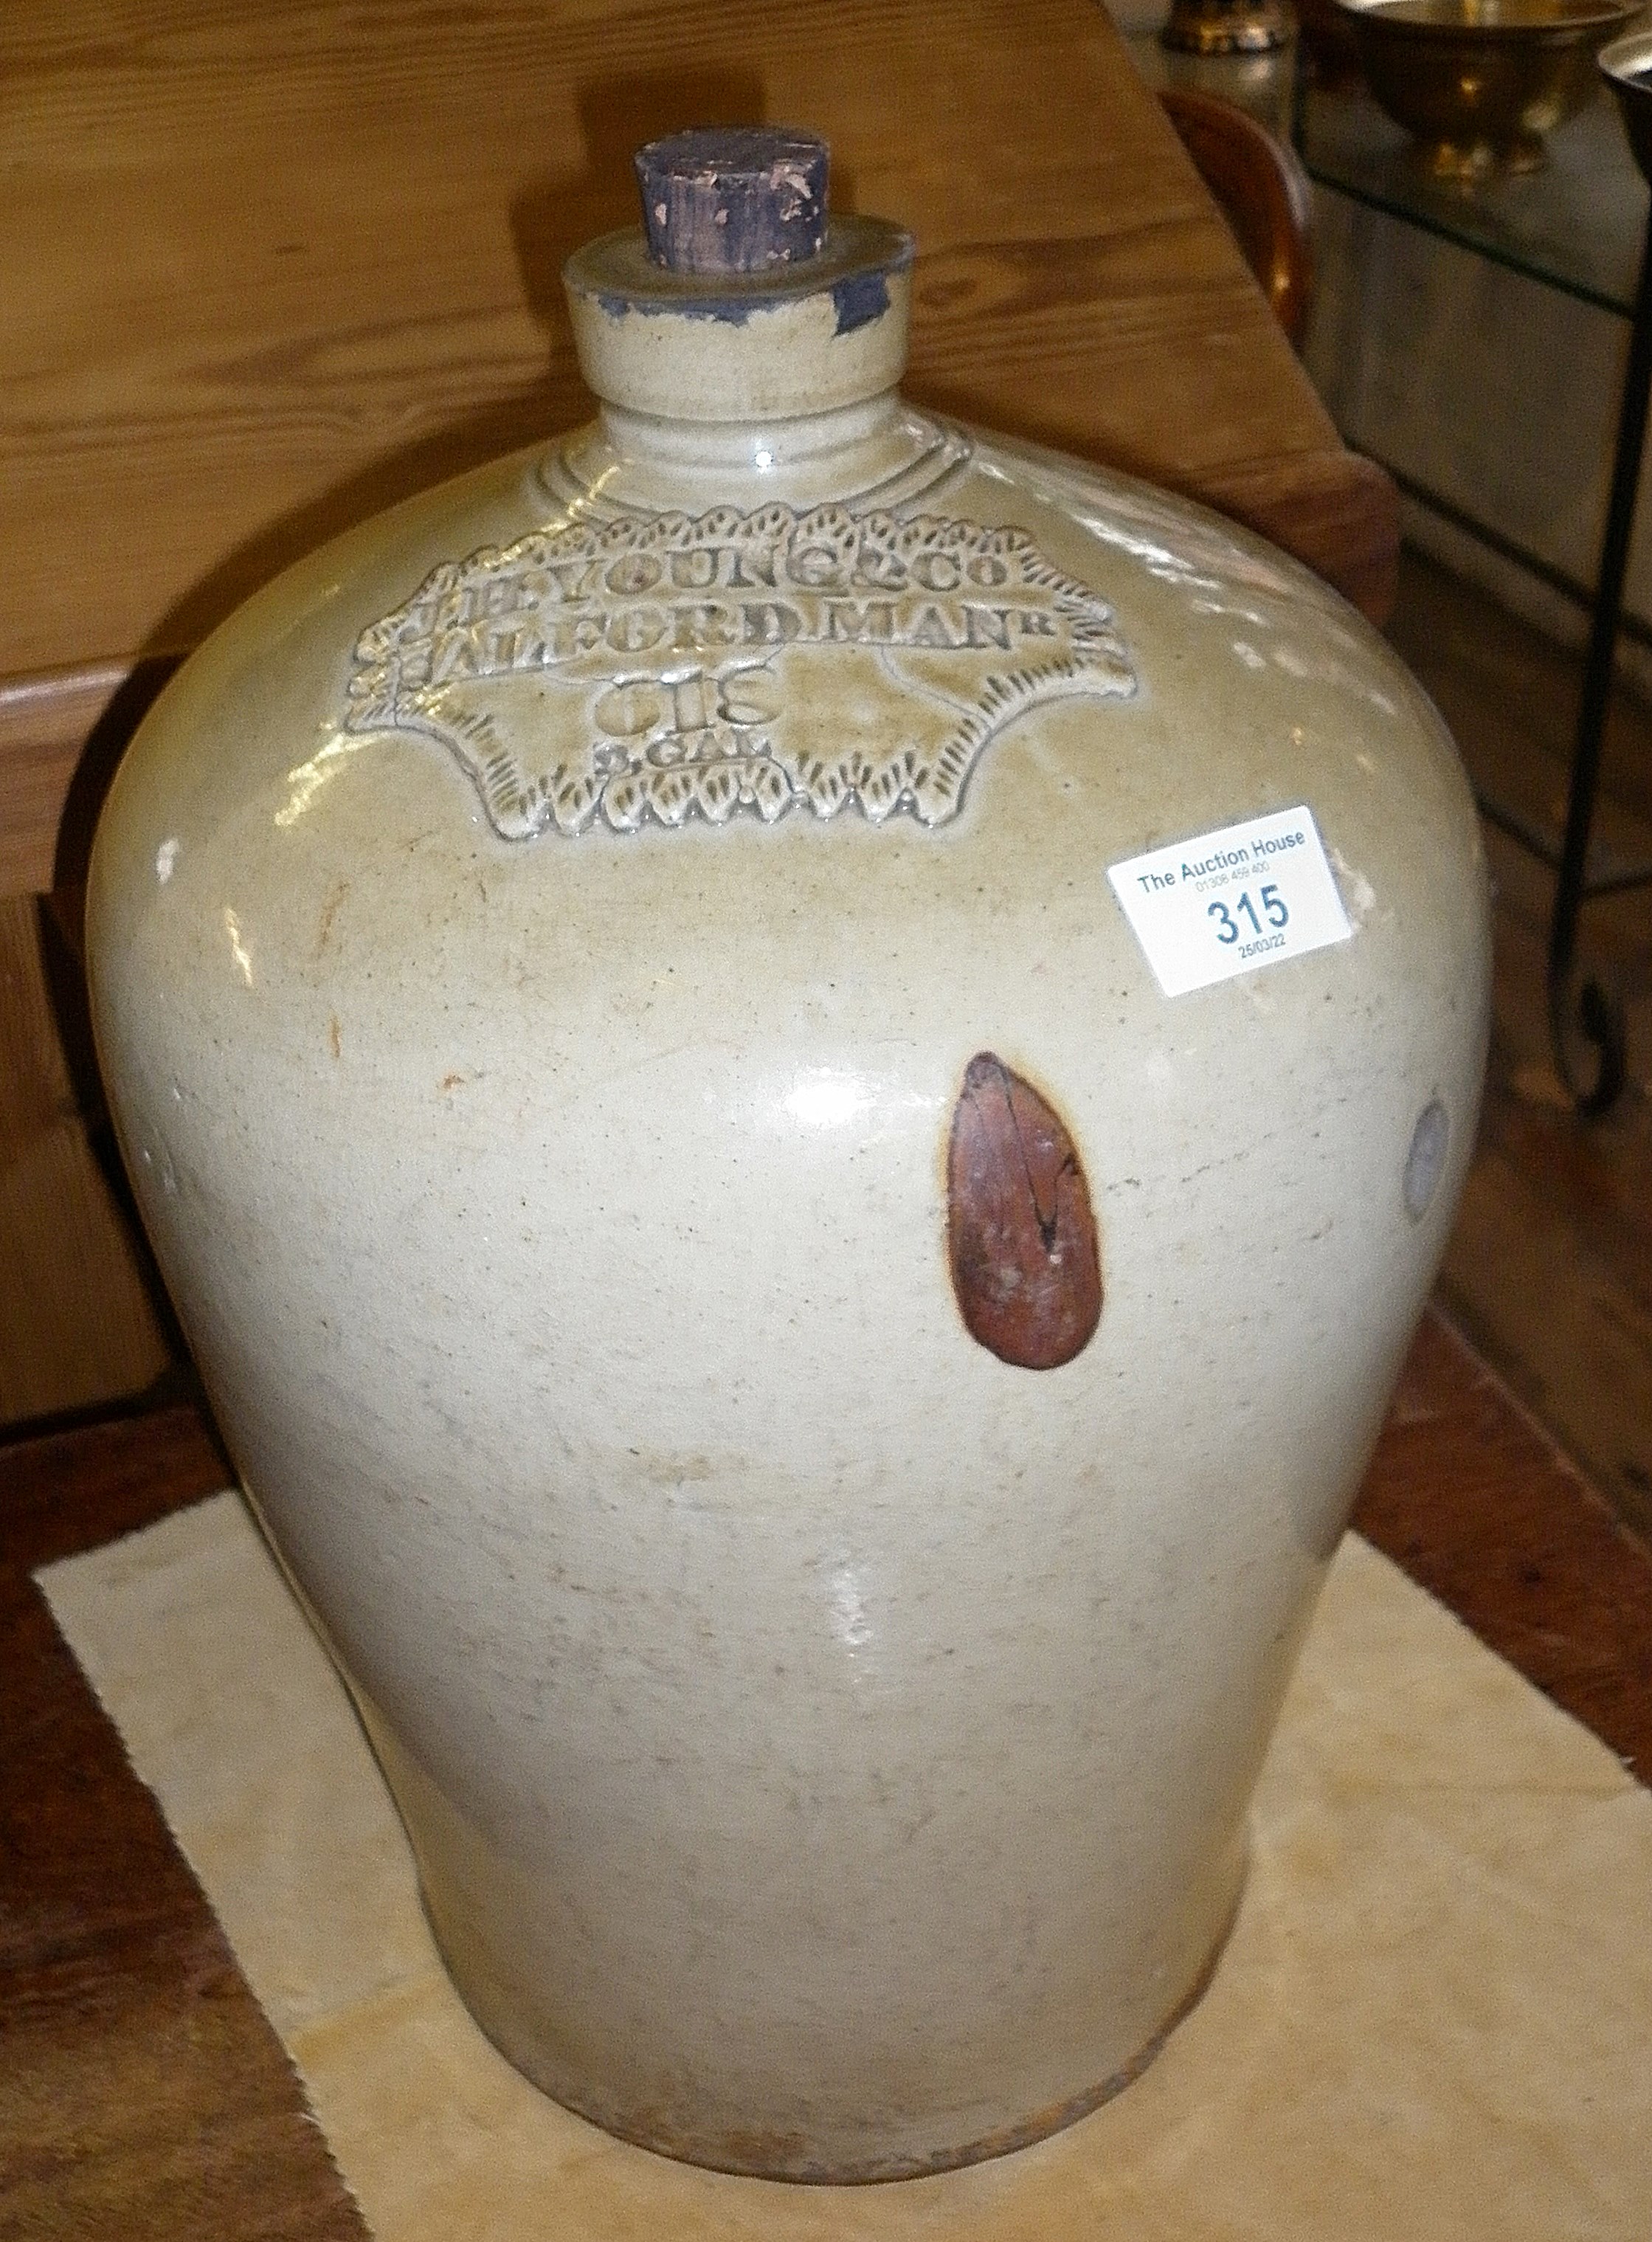 Large stoneware flagon with impressed legend, "J.H. YOUNG & CO. SALFORD MANR, 618 2GAL", c. 1850's